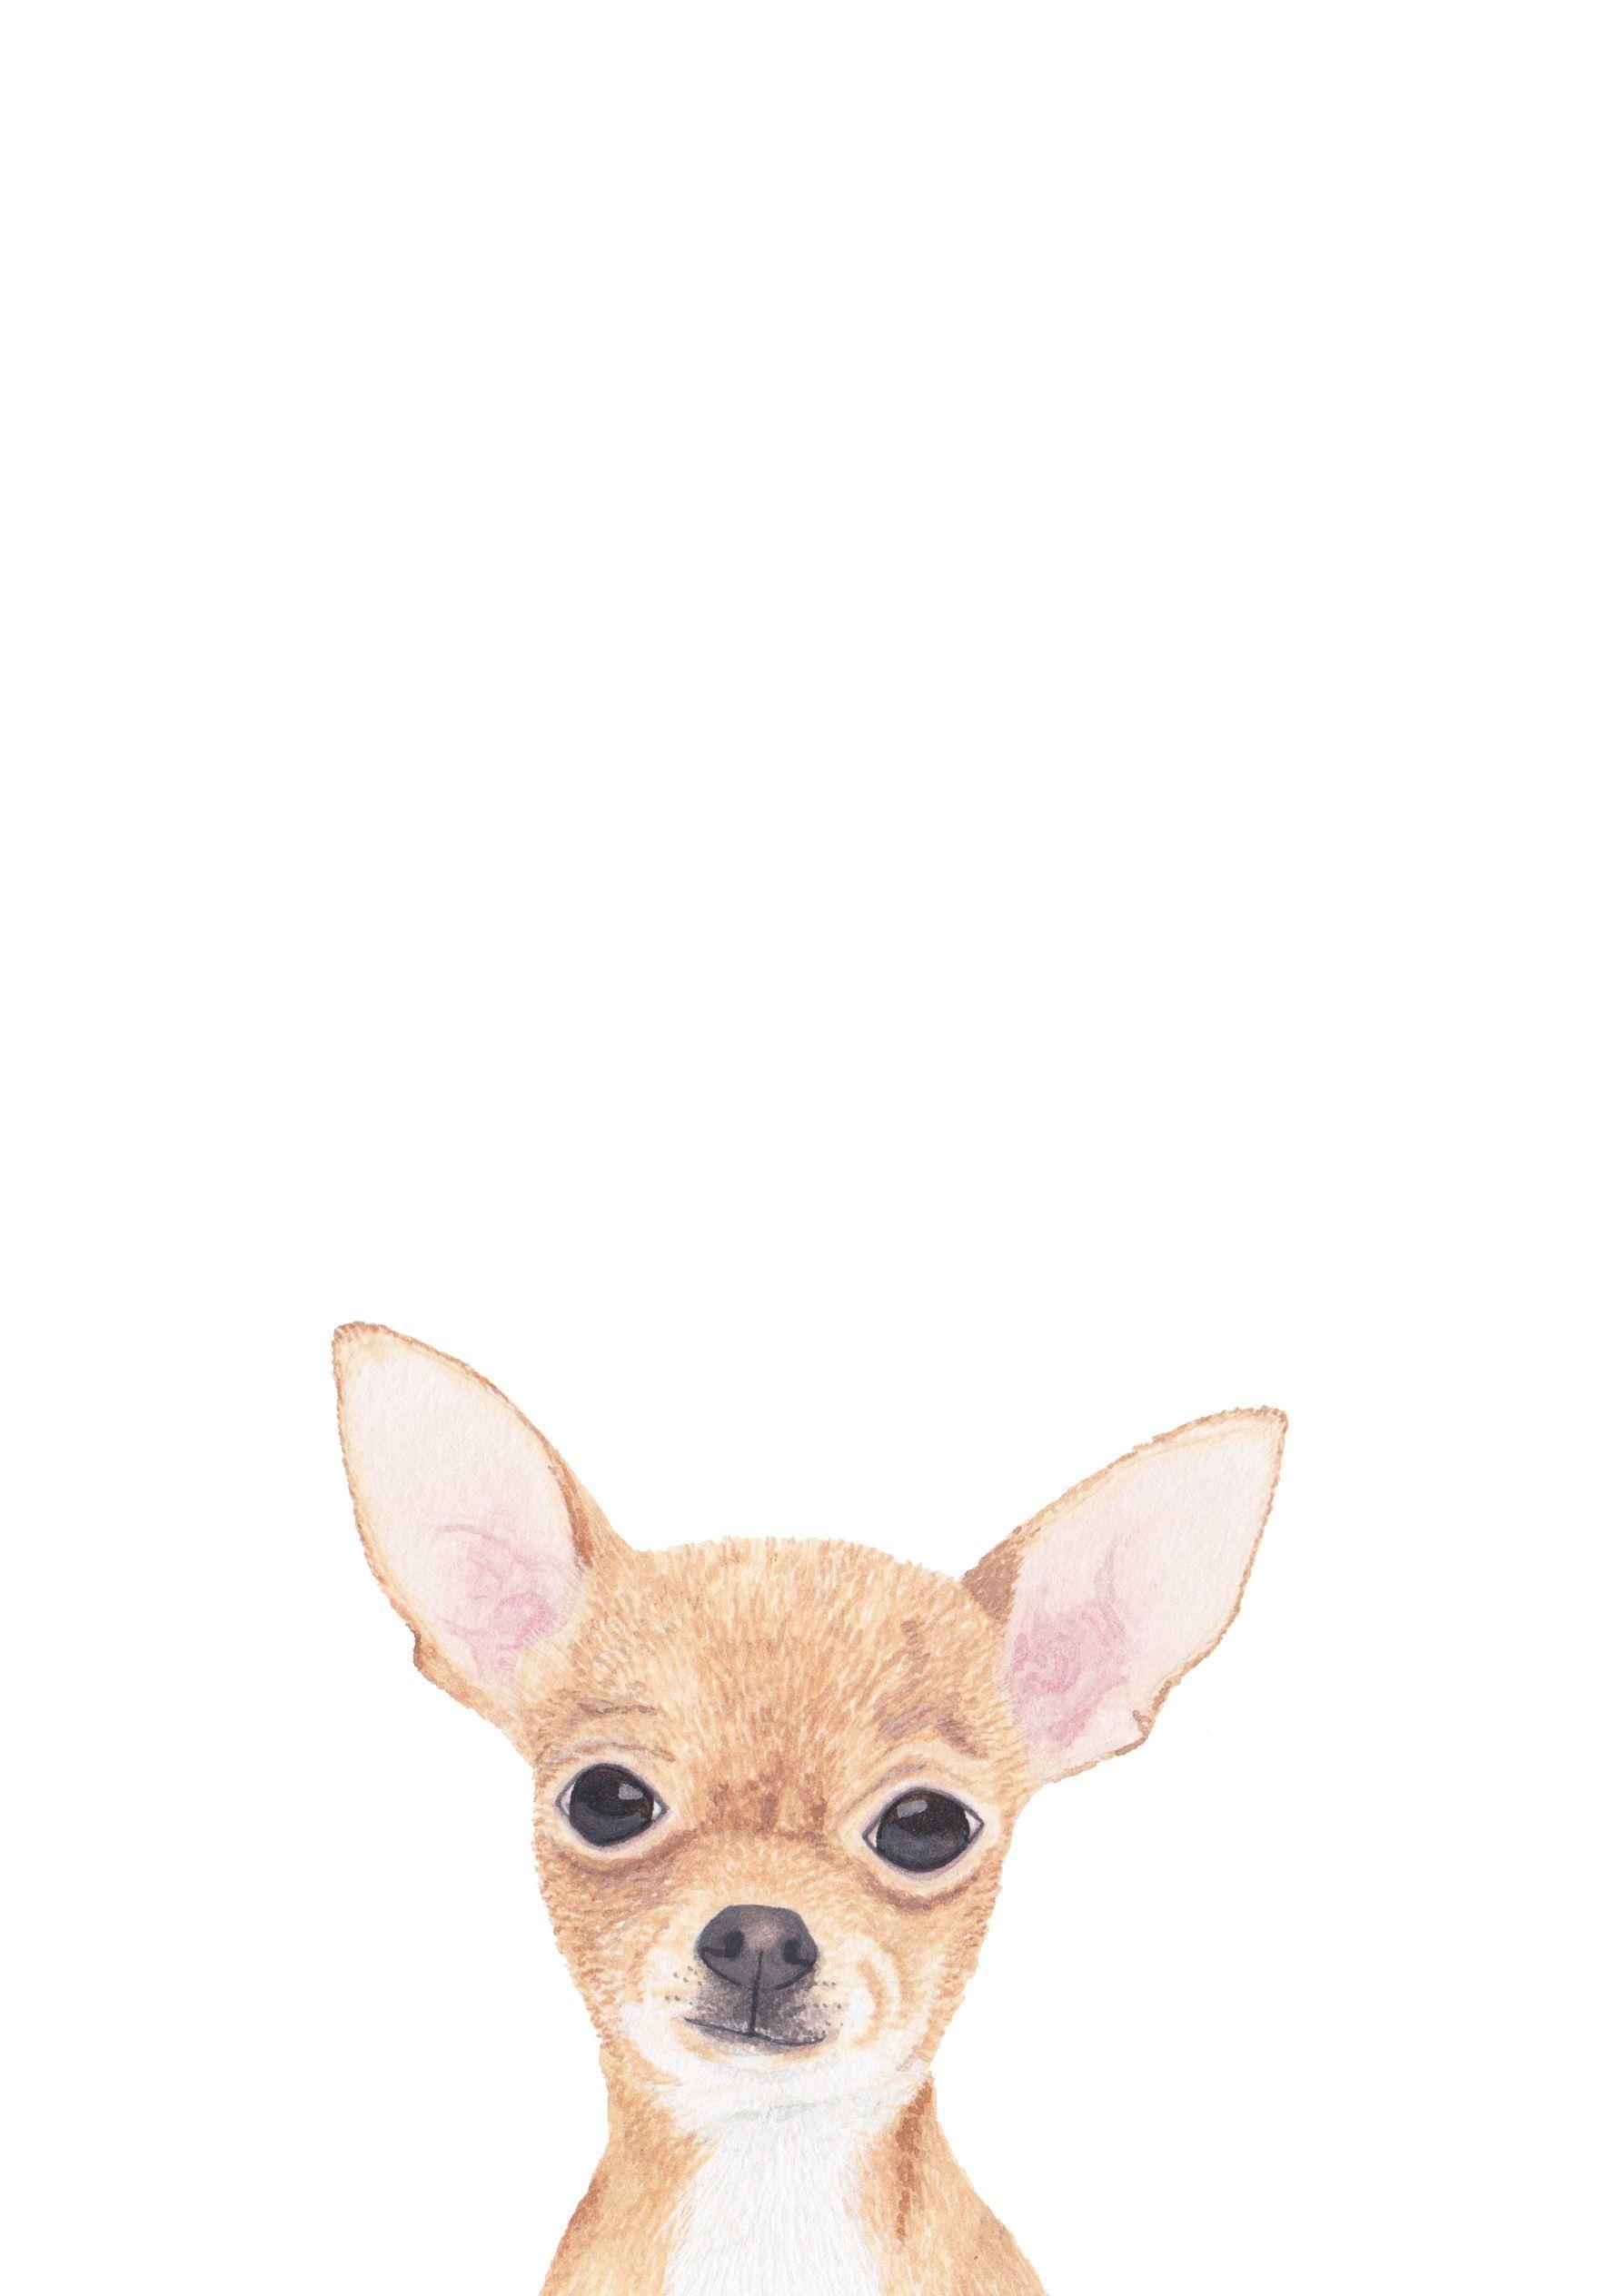 Chihuahua Illustration by Louise Jewel #chihuahua